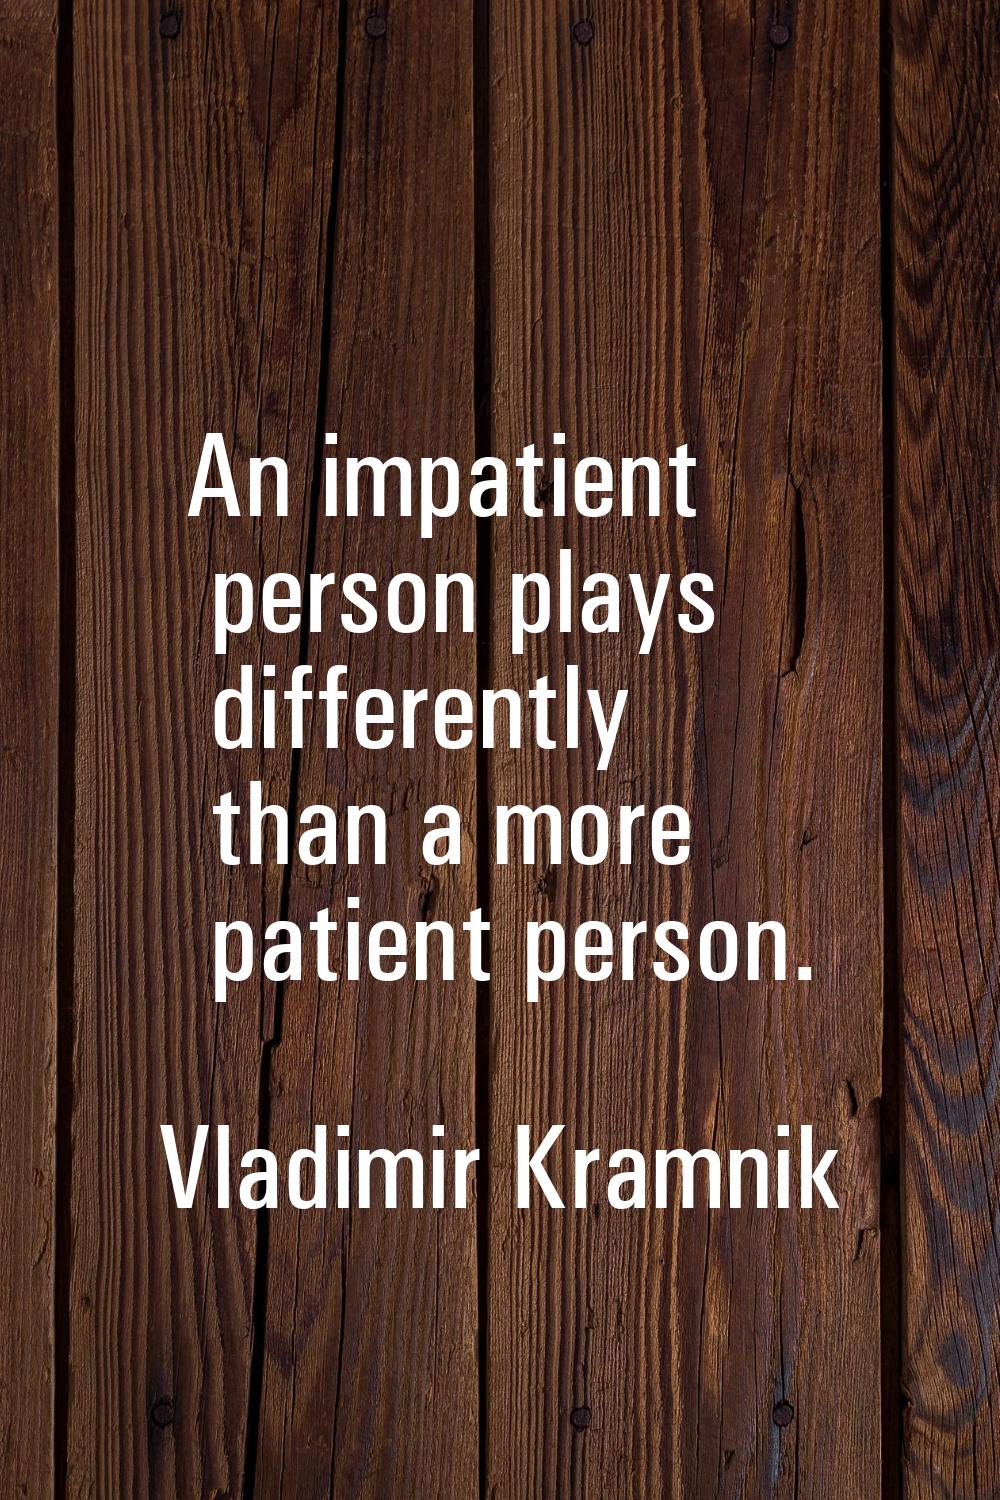 An impatient person plays differently than a more patient person.